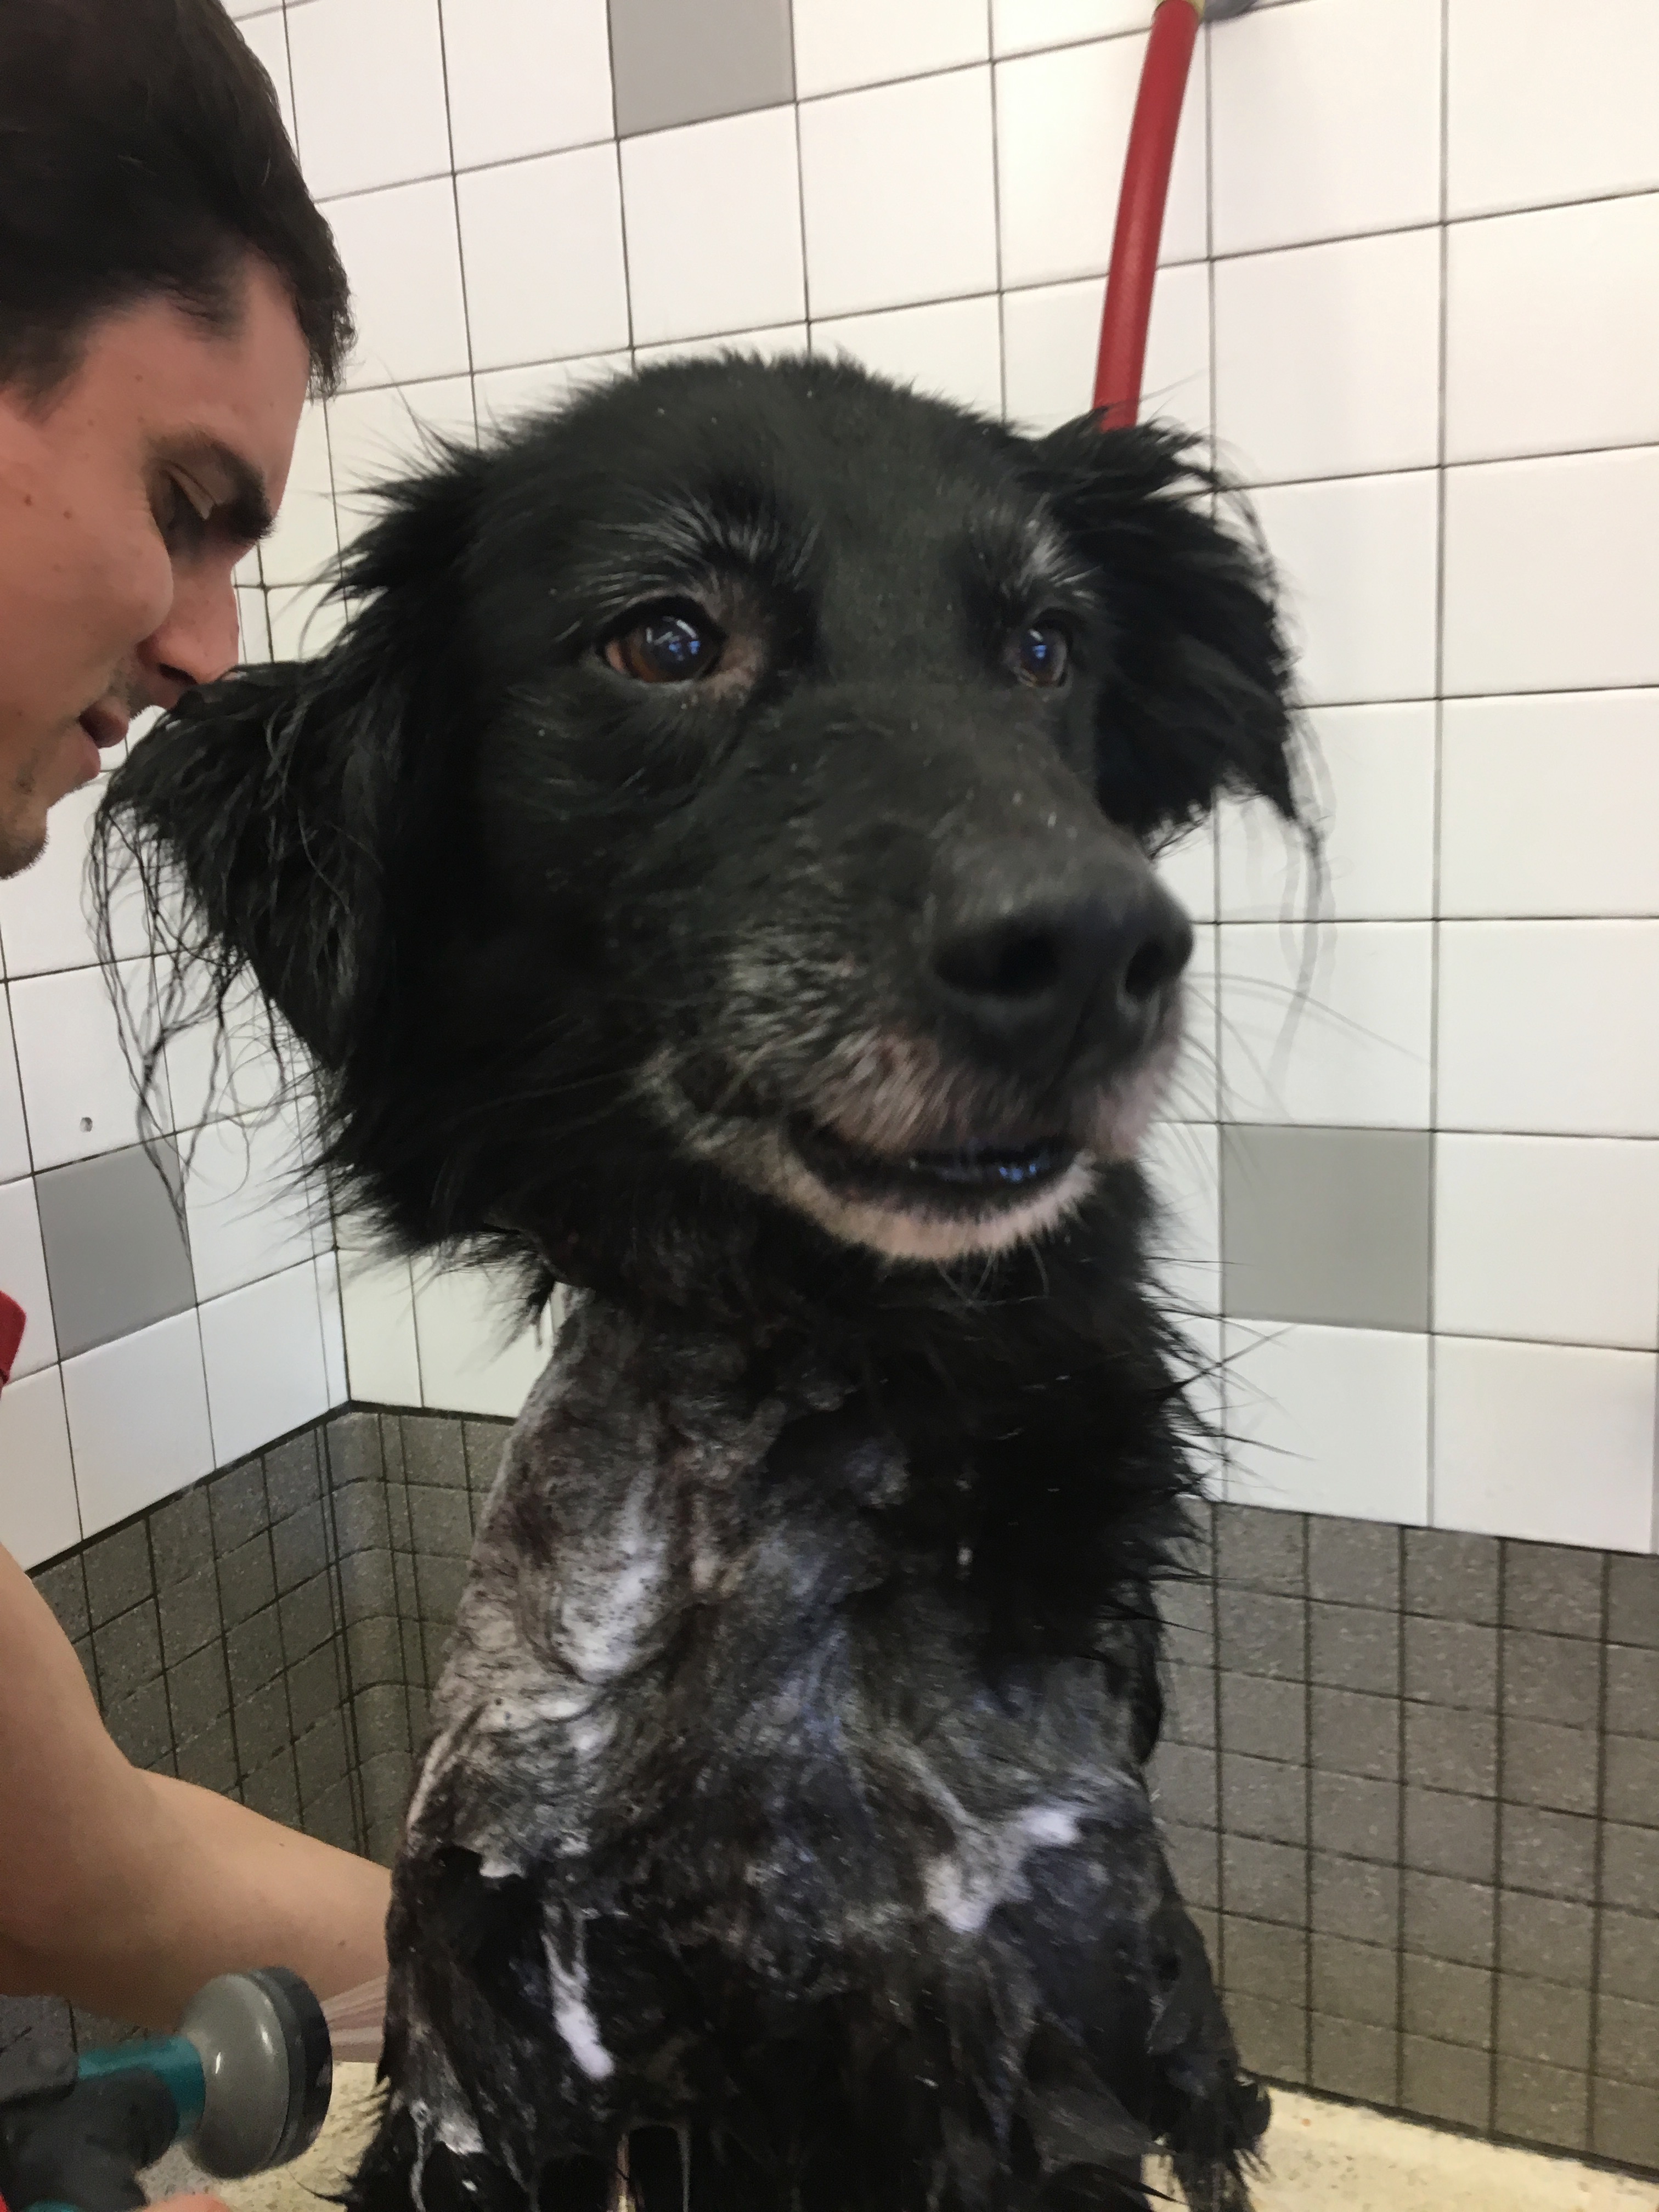 Black Border Collie Mix In A Bathtub Being Sprayed By A Hose And Looking Like The Least Gruntled Thing In The Entire World